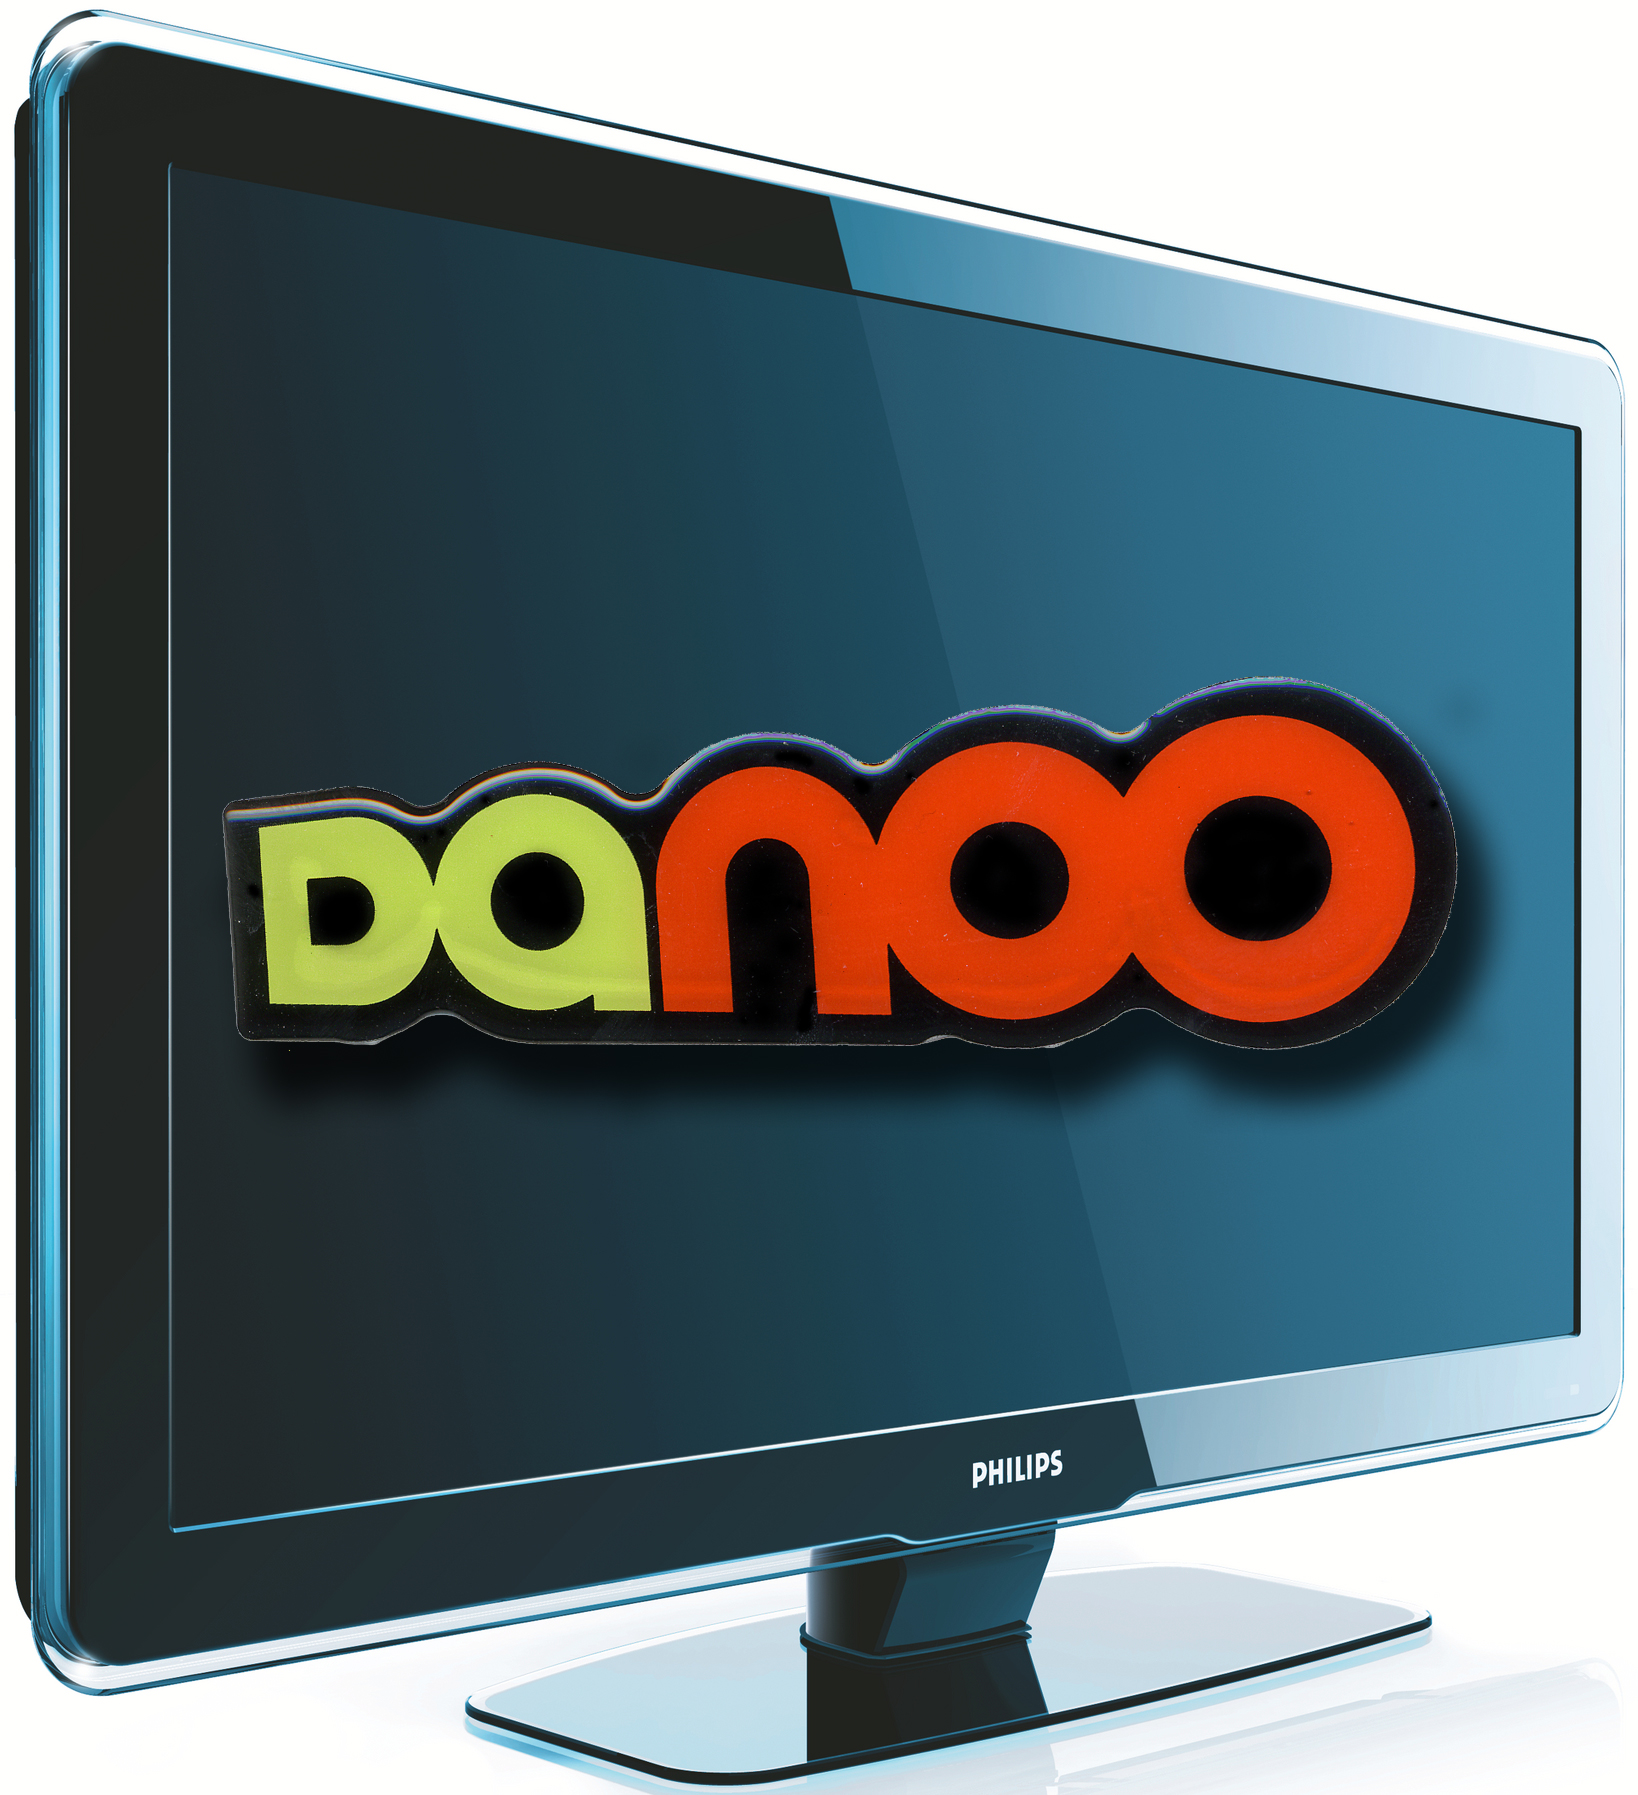 the word doo is mounted on a computer screen